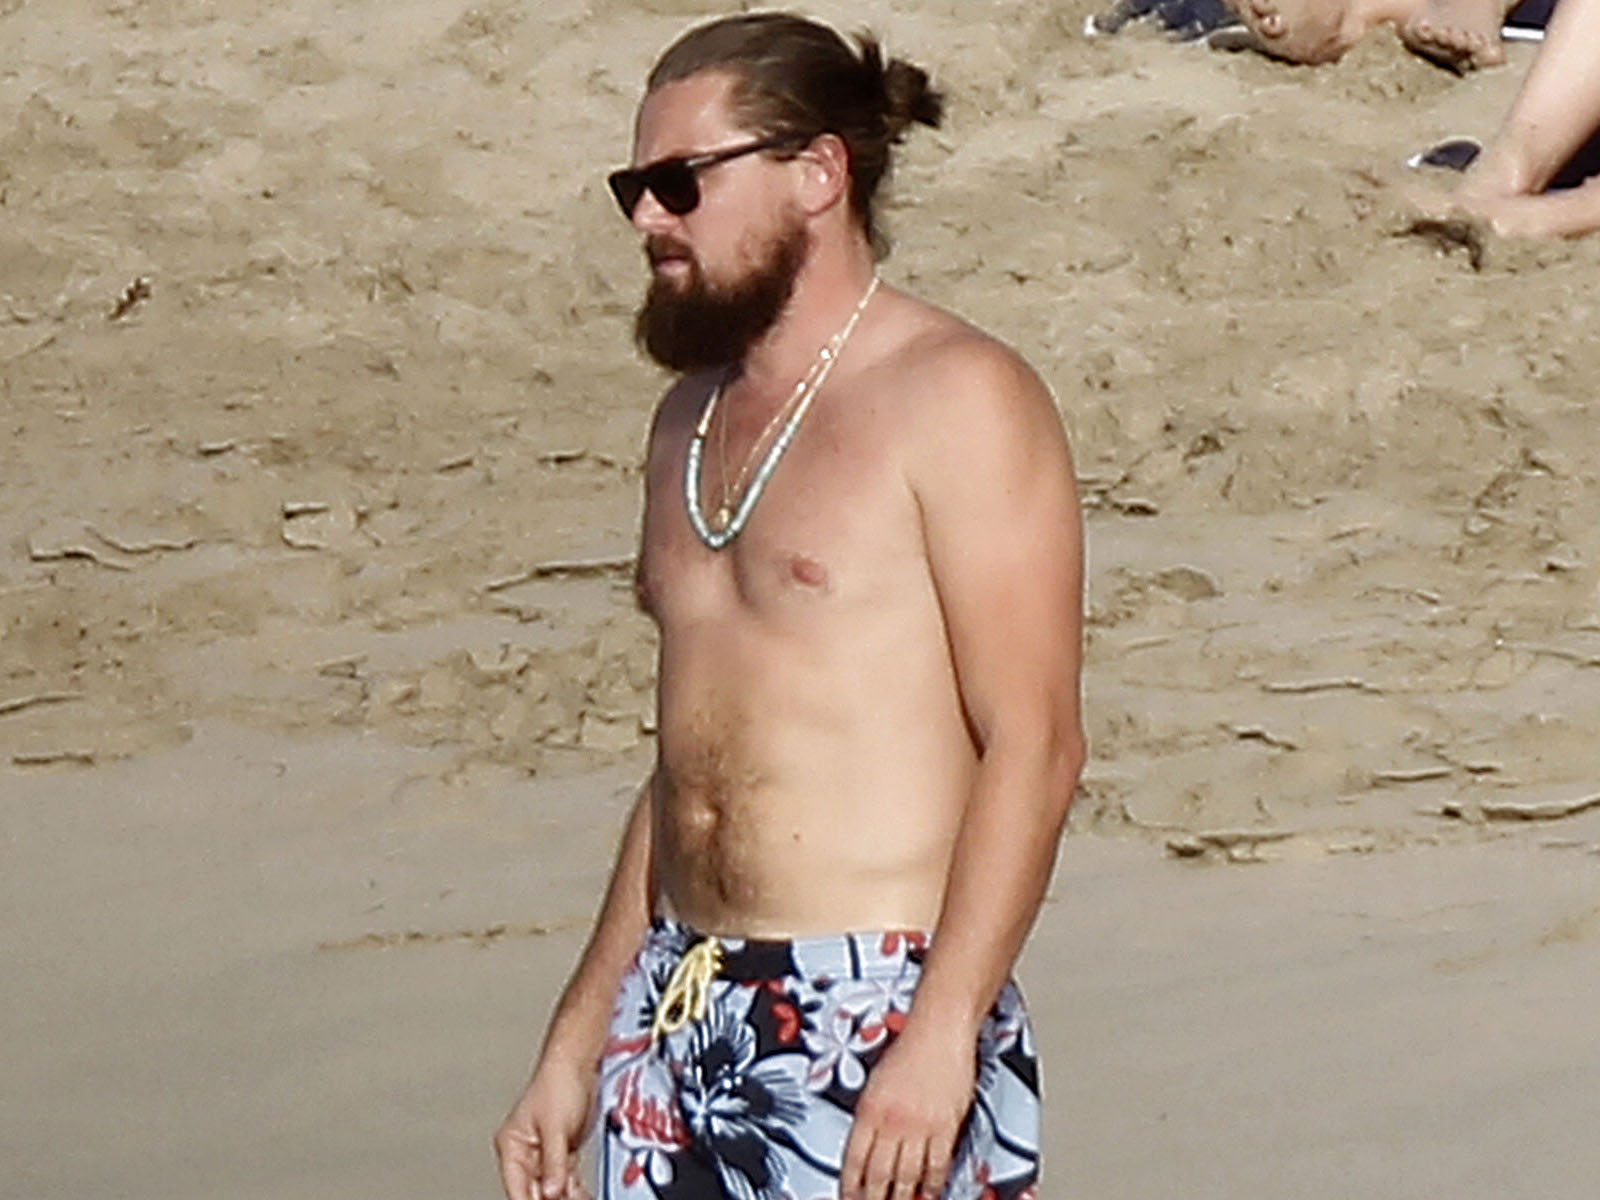 Leonardo DiCaprio partying with a bevy of bikini clad beauties in St. Barth on NYE